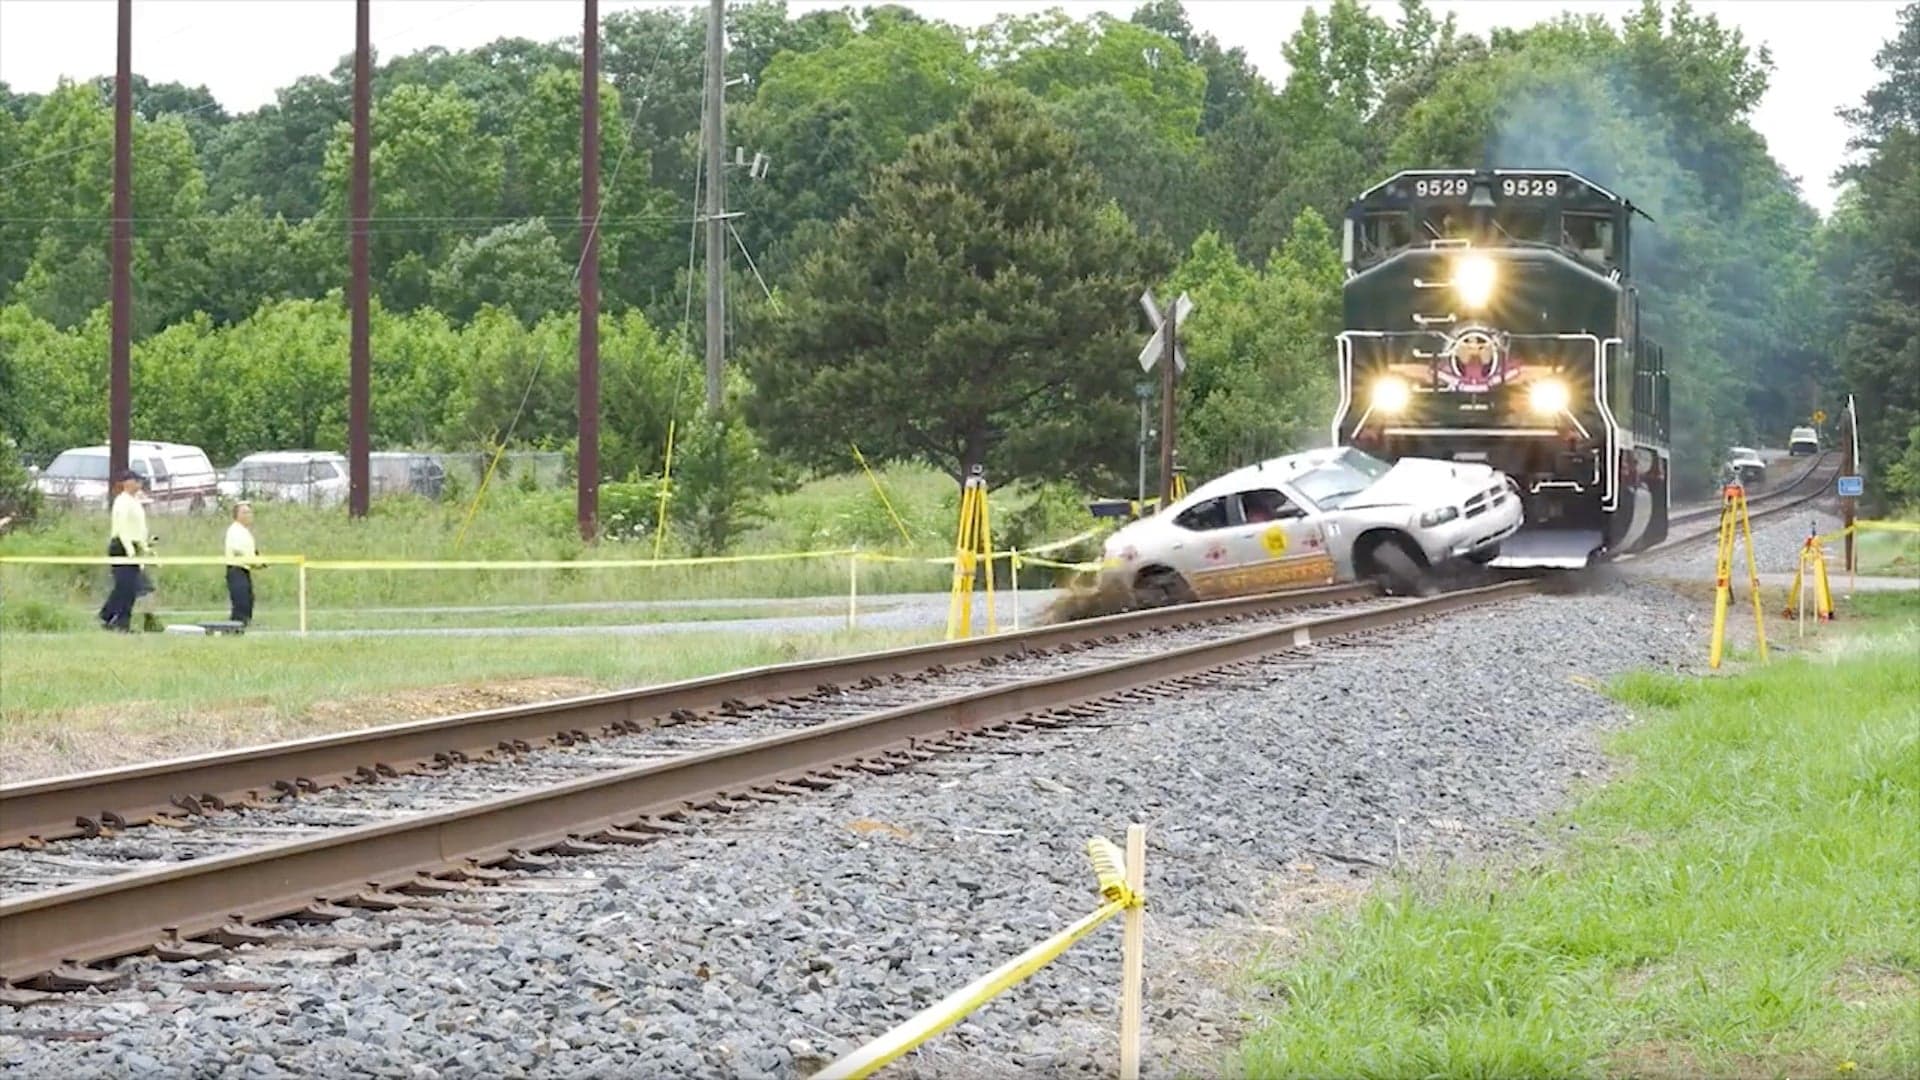 This Violent In-Car Video Shows What It’s Like to Get Hit by a Train